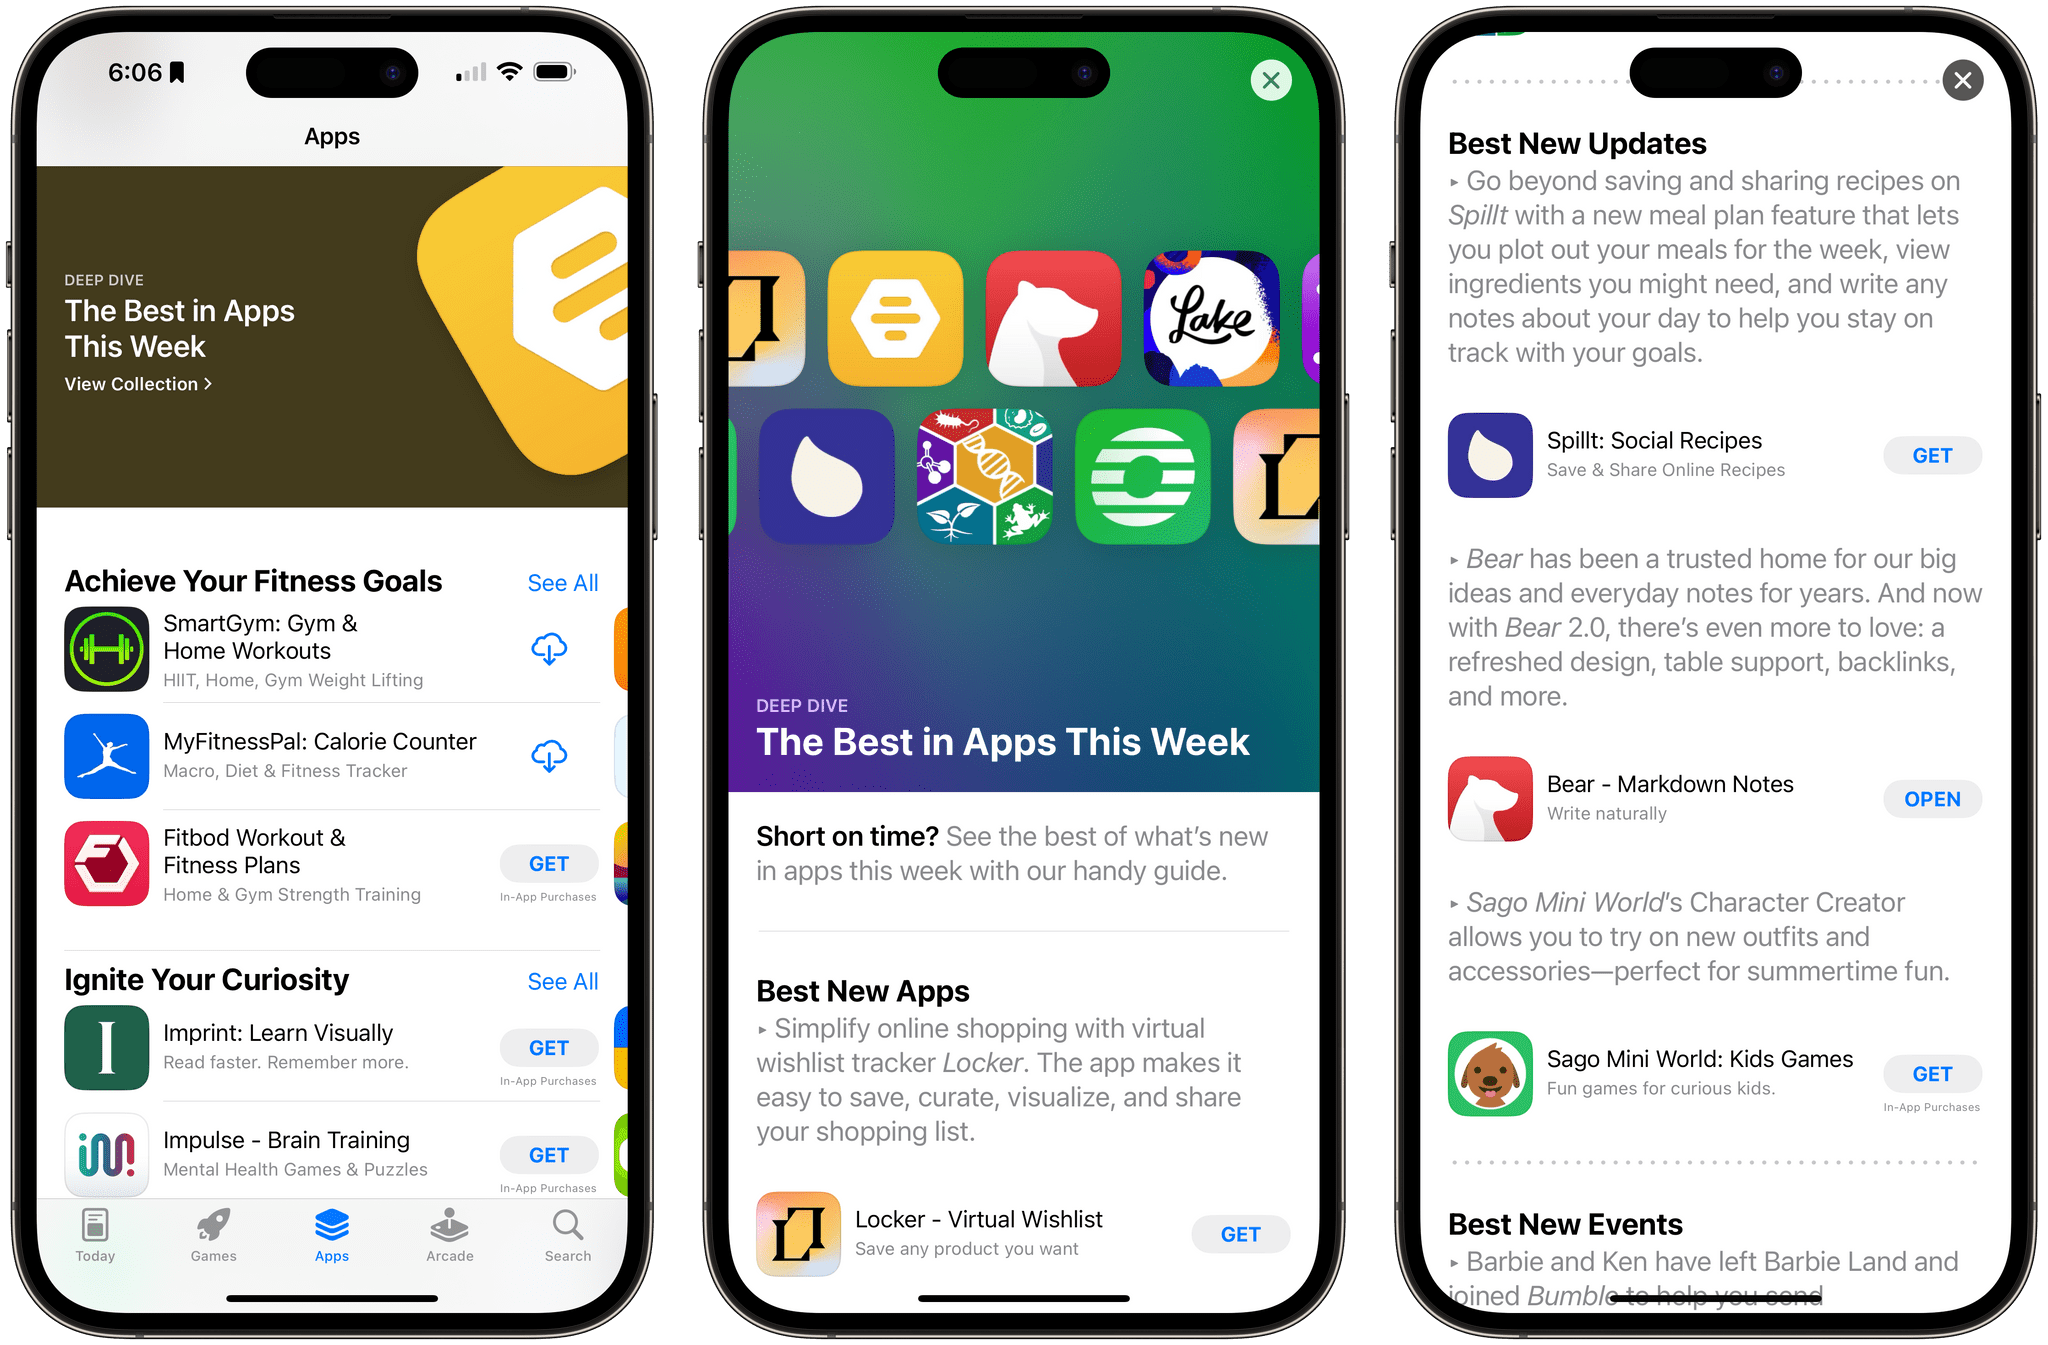 Just Ahead Of Thanksgiving, Games Take Over The App Store - MacStories